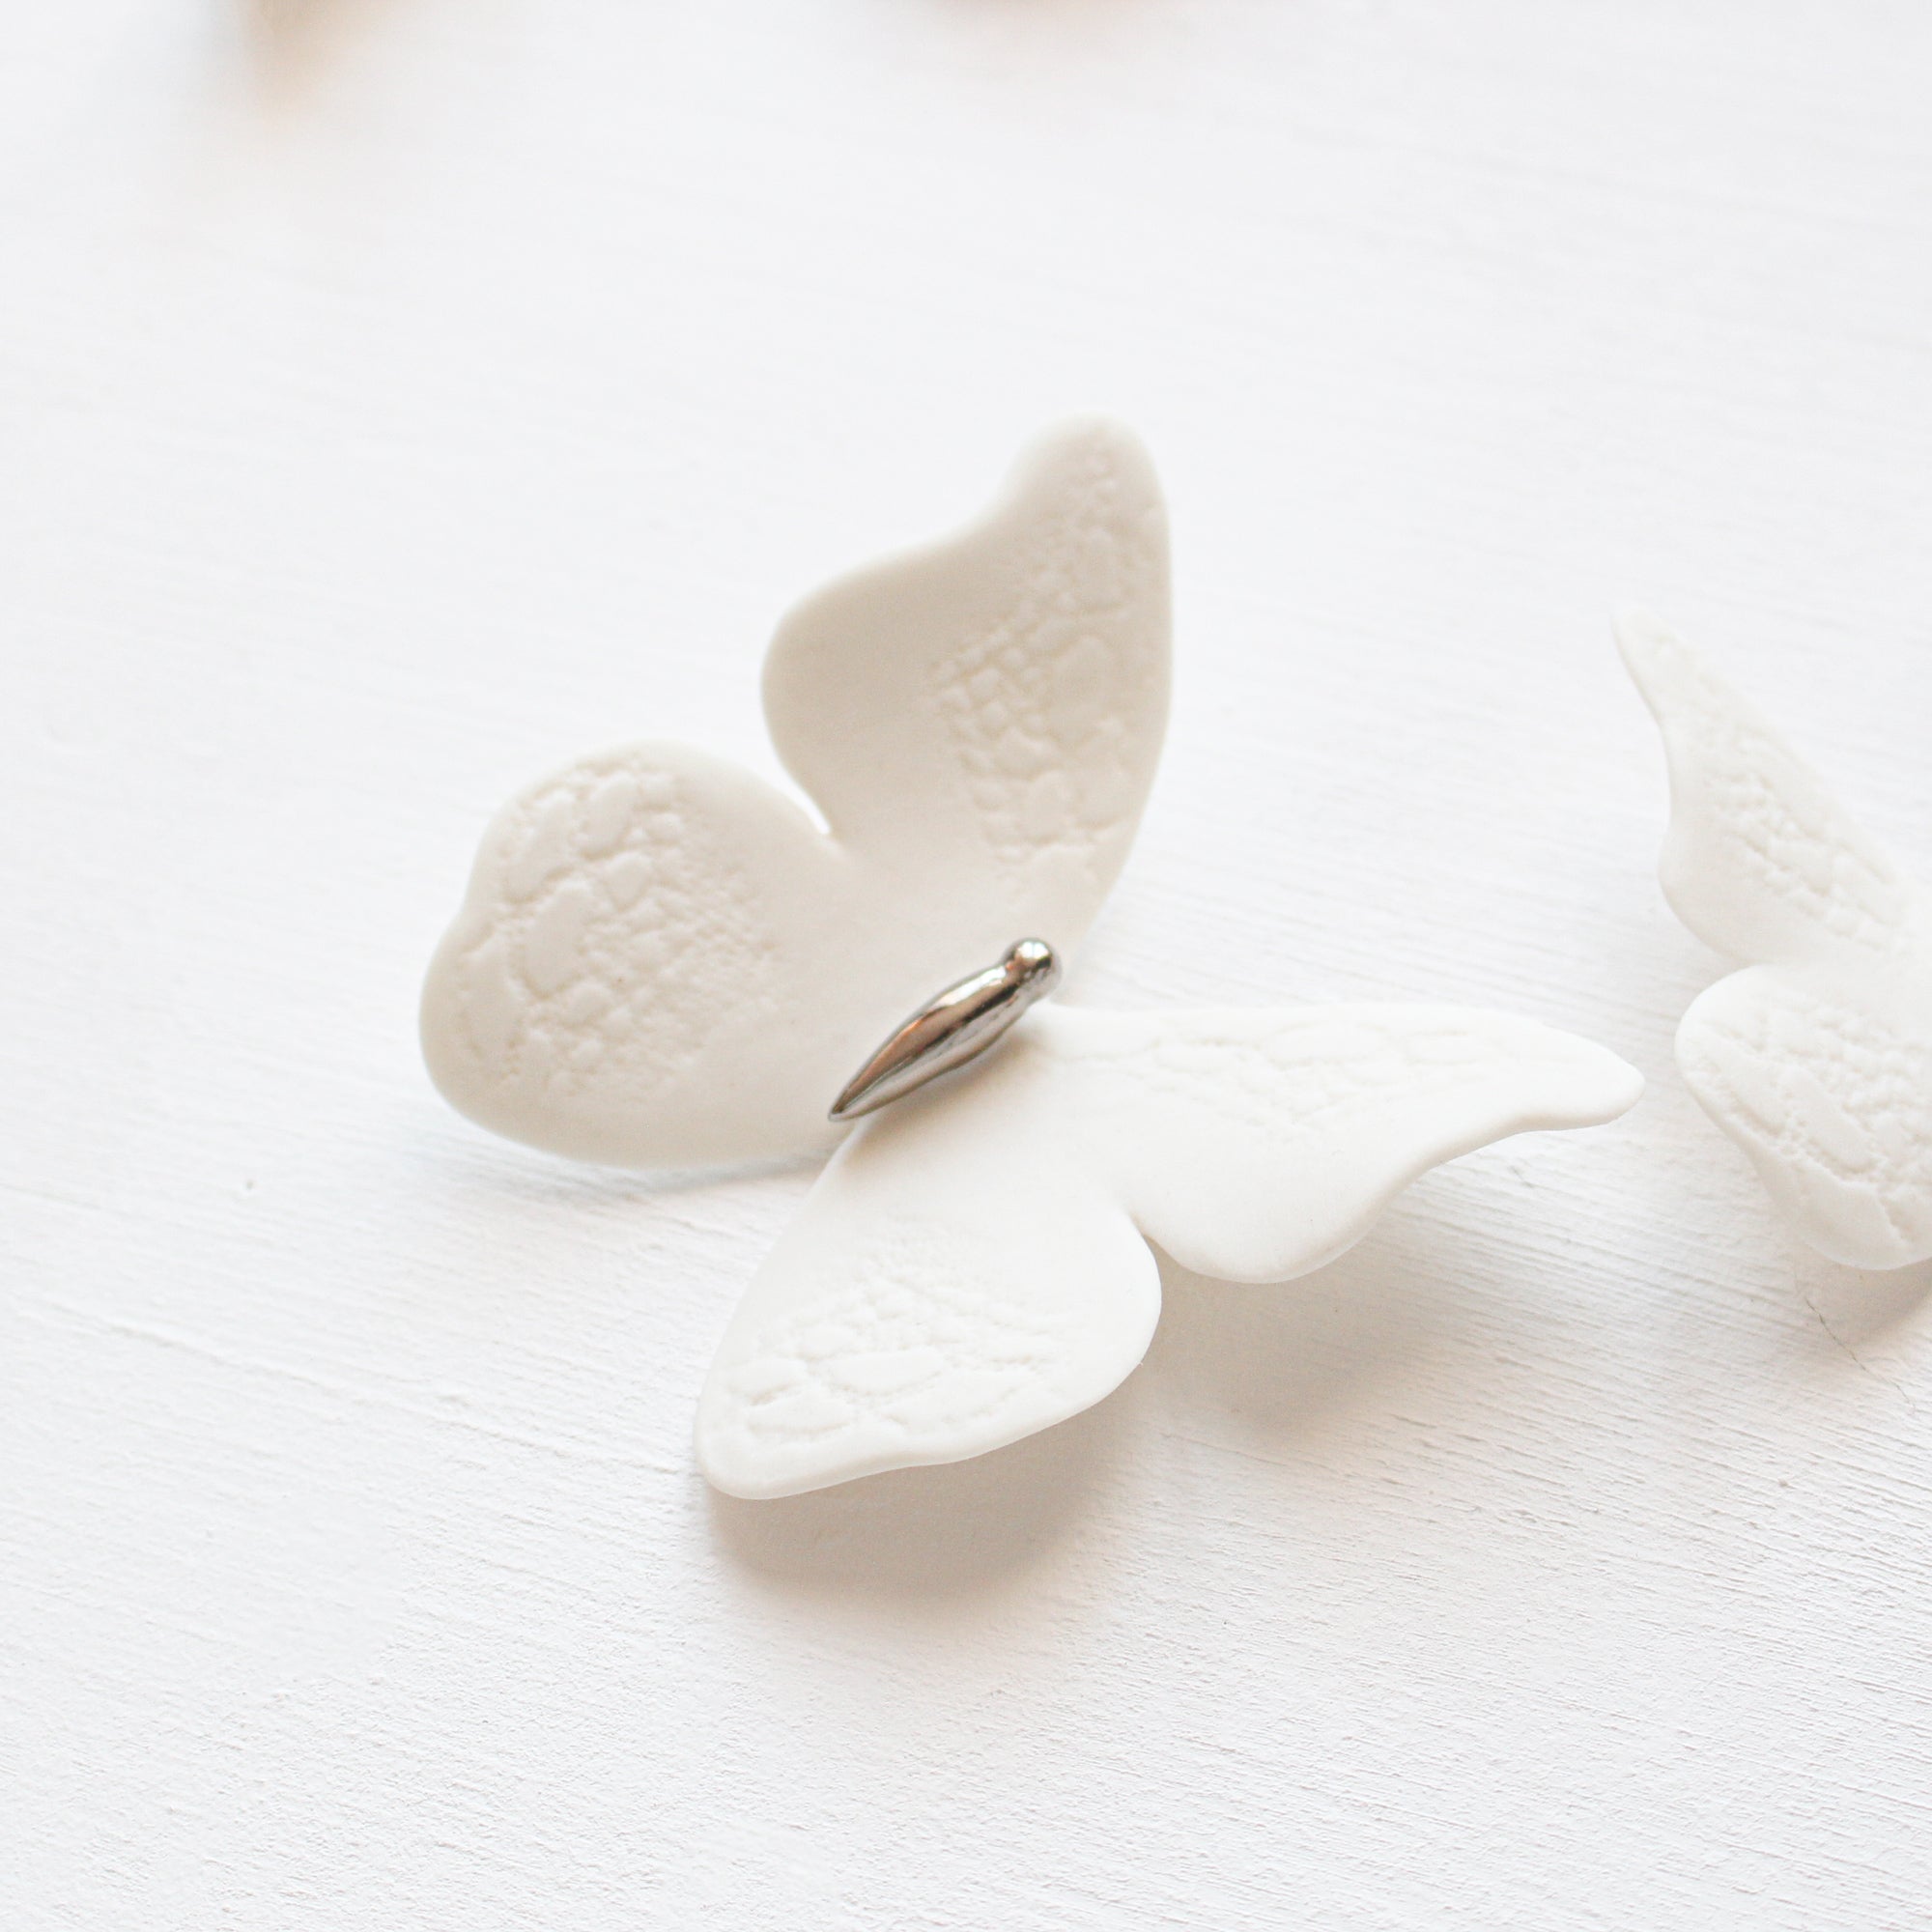 3 White and Platinum Lace Print Porcelain Butterflies handmade in France by Alain Granell